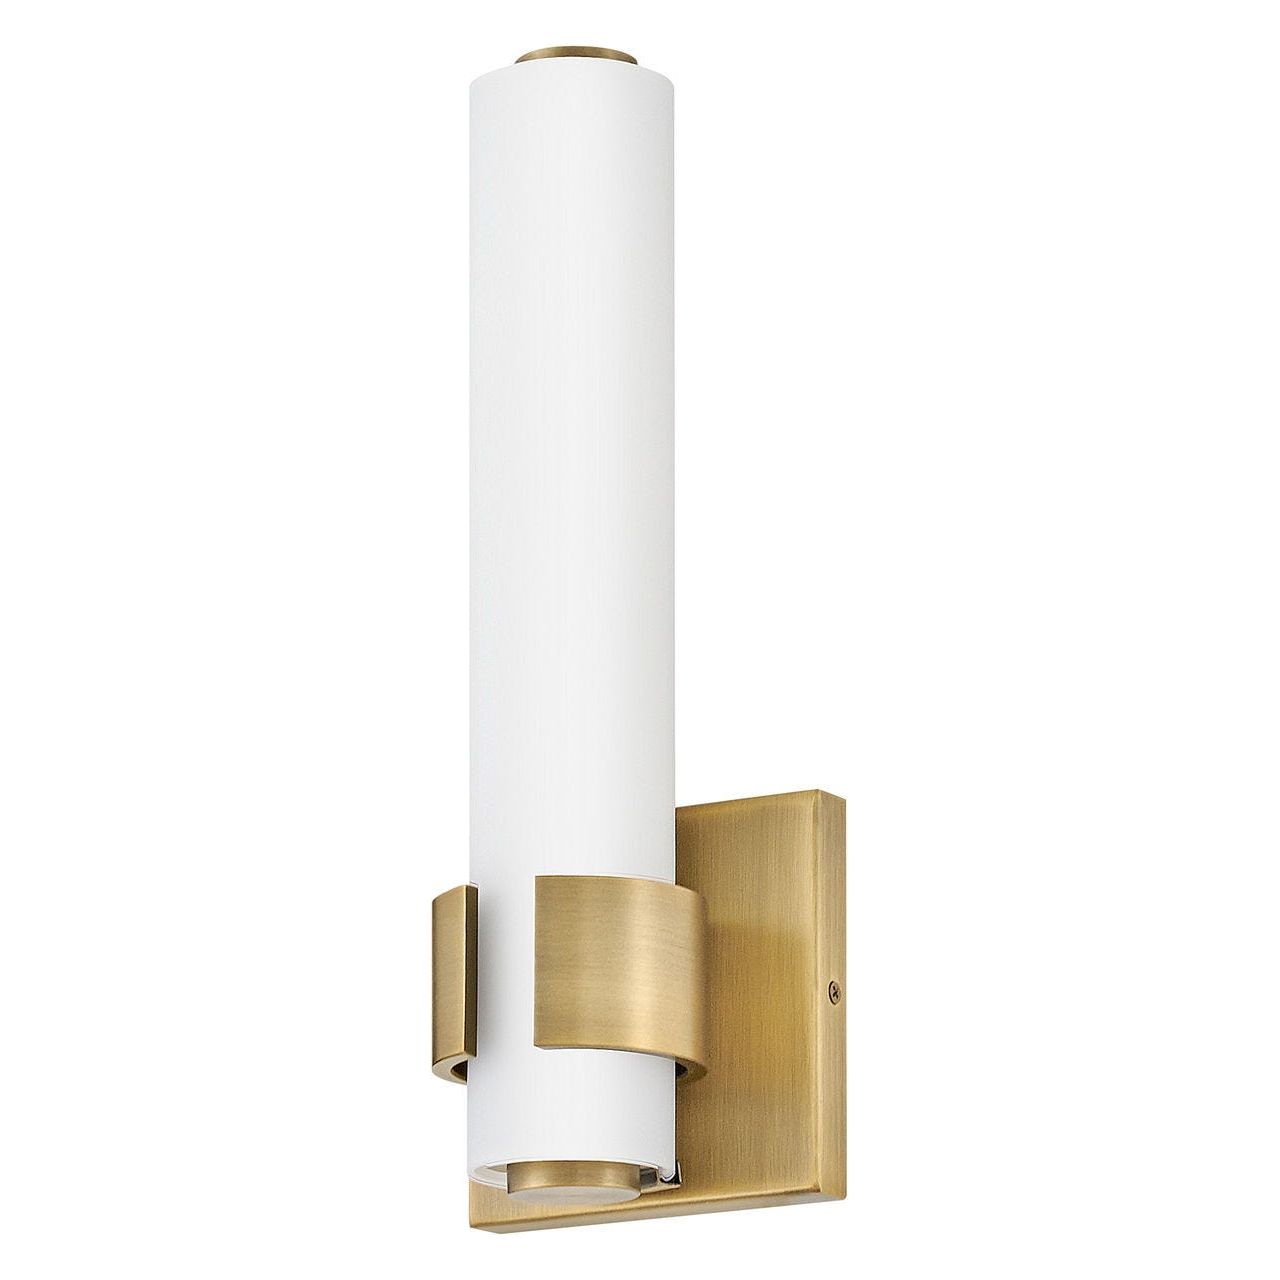 Hinkley - Aiden Small LED Sconce - Lights Canada